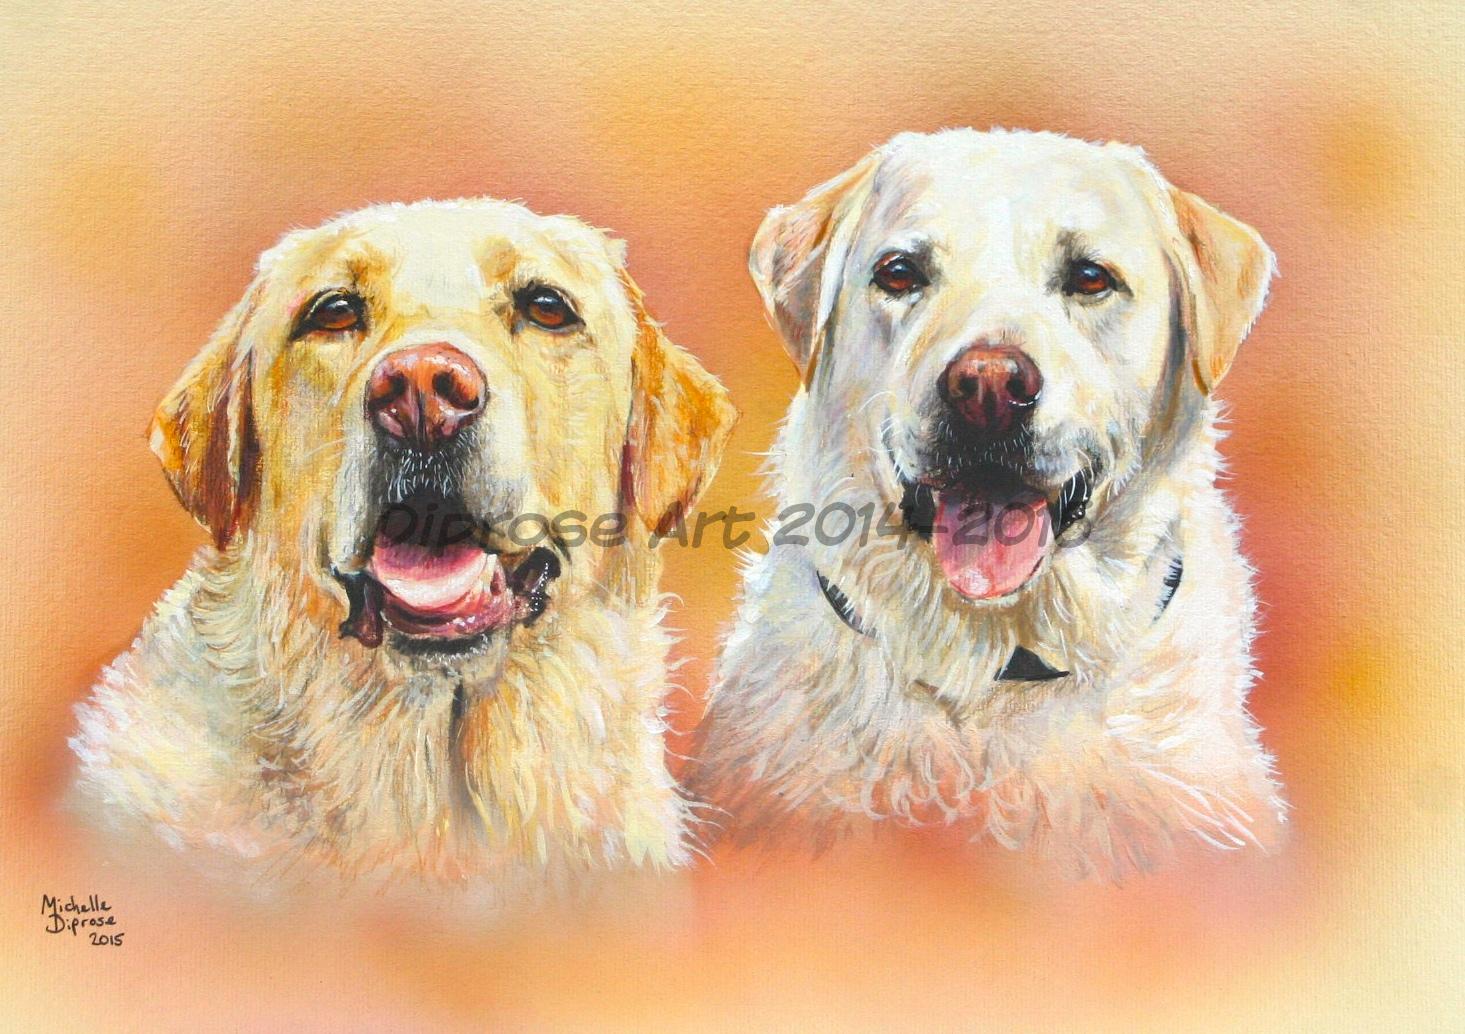 Acrylics on board - approx A3 - pet dog portrait - These two wonderful expressive characters are both rescued yellow labs who have certainly fallen on their paws!  love these two boys